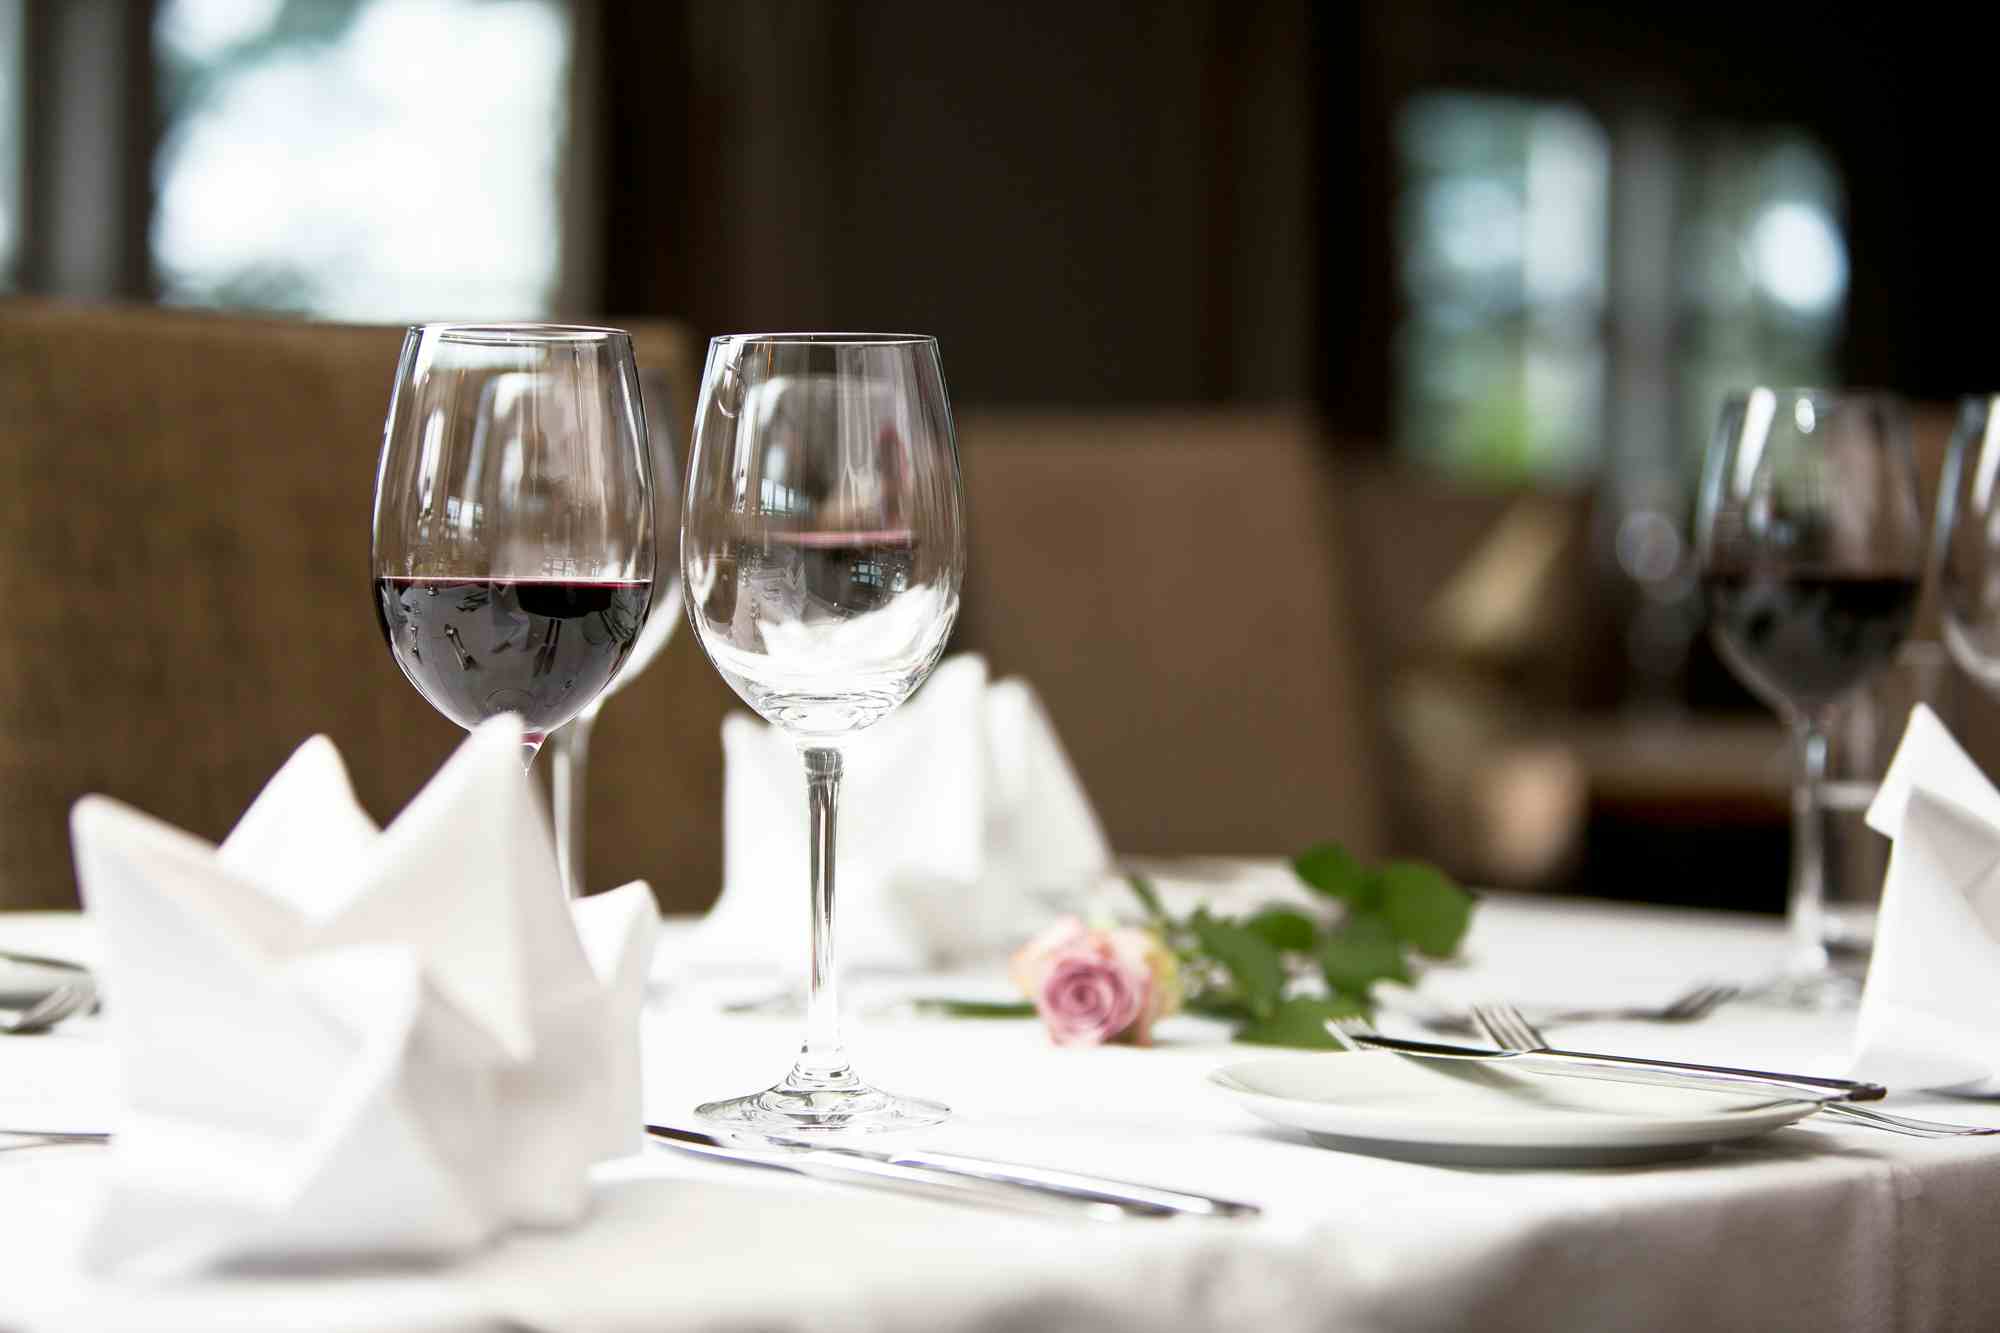 Food plates, kitchen staff, hotel restaurant, set table with white tablecloth, wine glasses on table